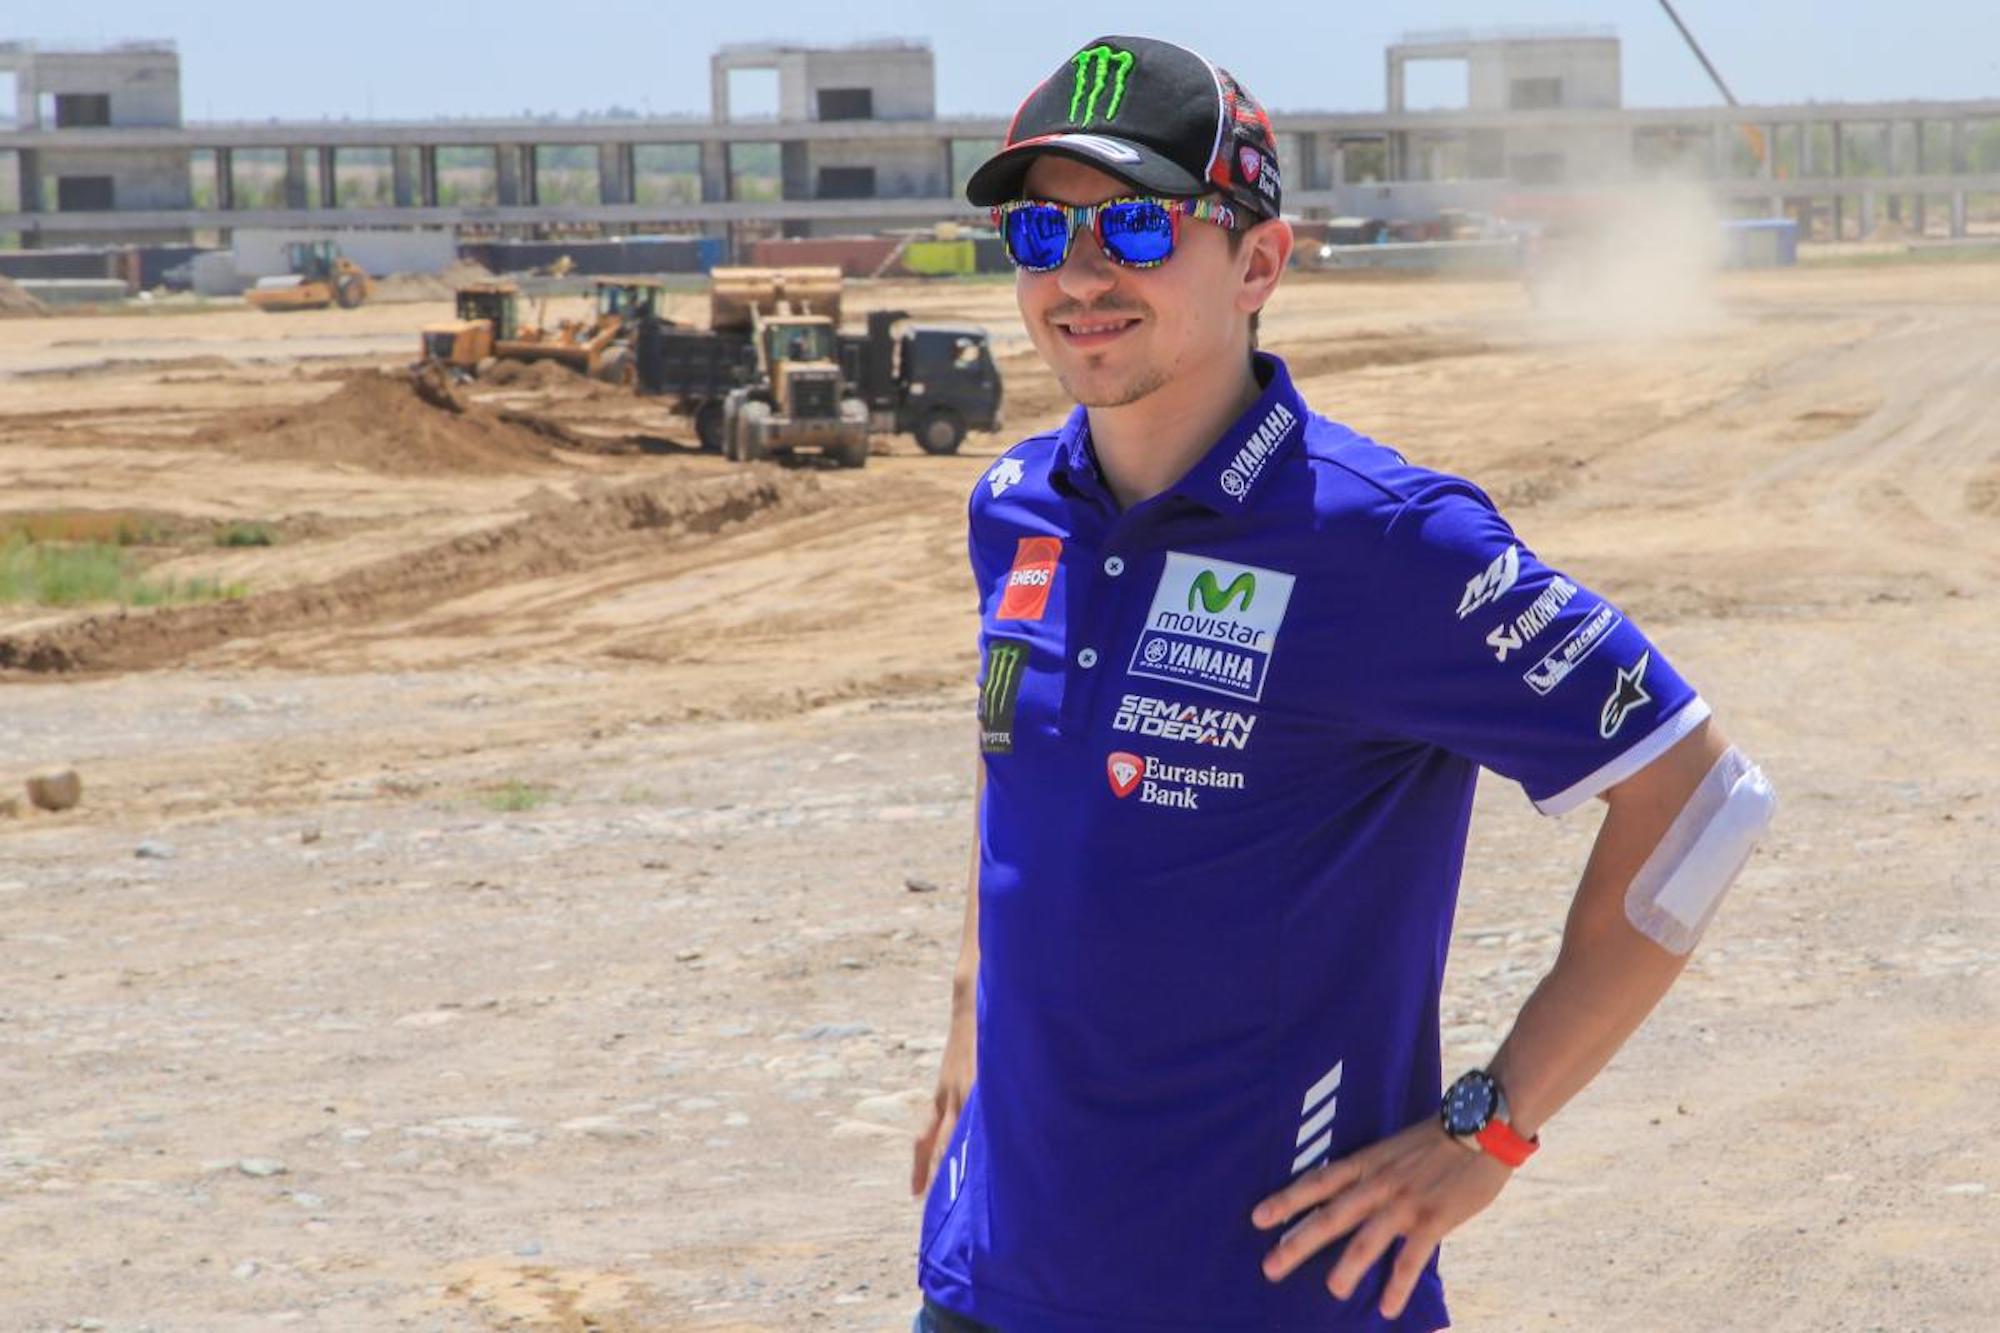 Lorenzo visiting the Sokol Racetrack. Media sourced from MotoGP.